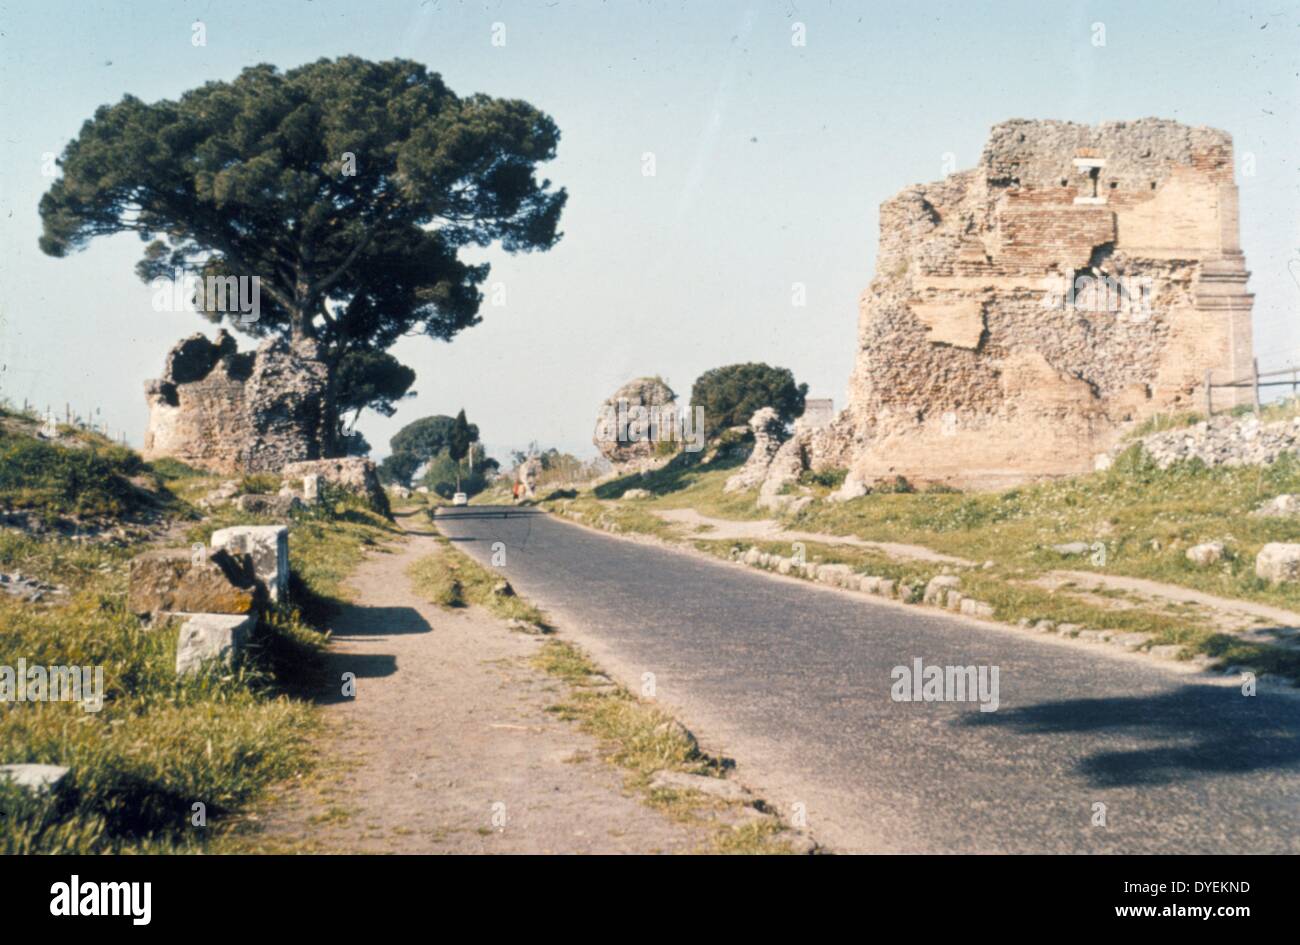 Rome; The Appian Way now resurfaced as a modern highway, between 1950 and 1960 Stock Photo